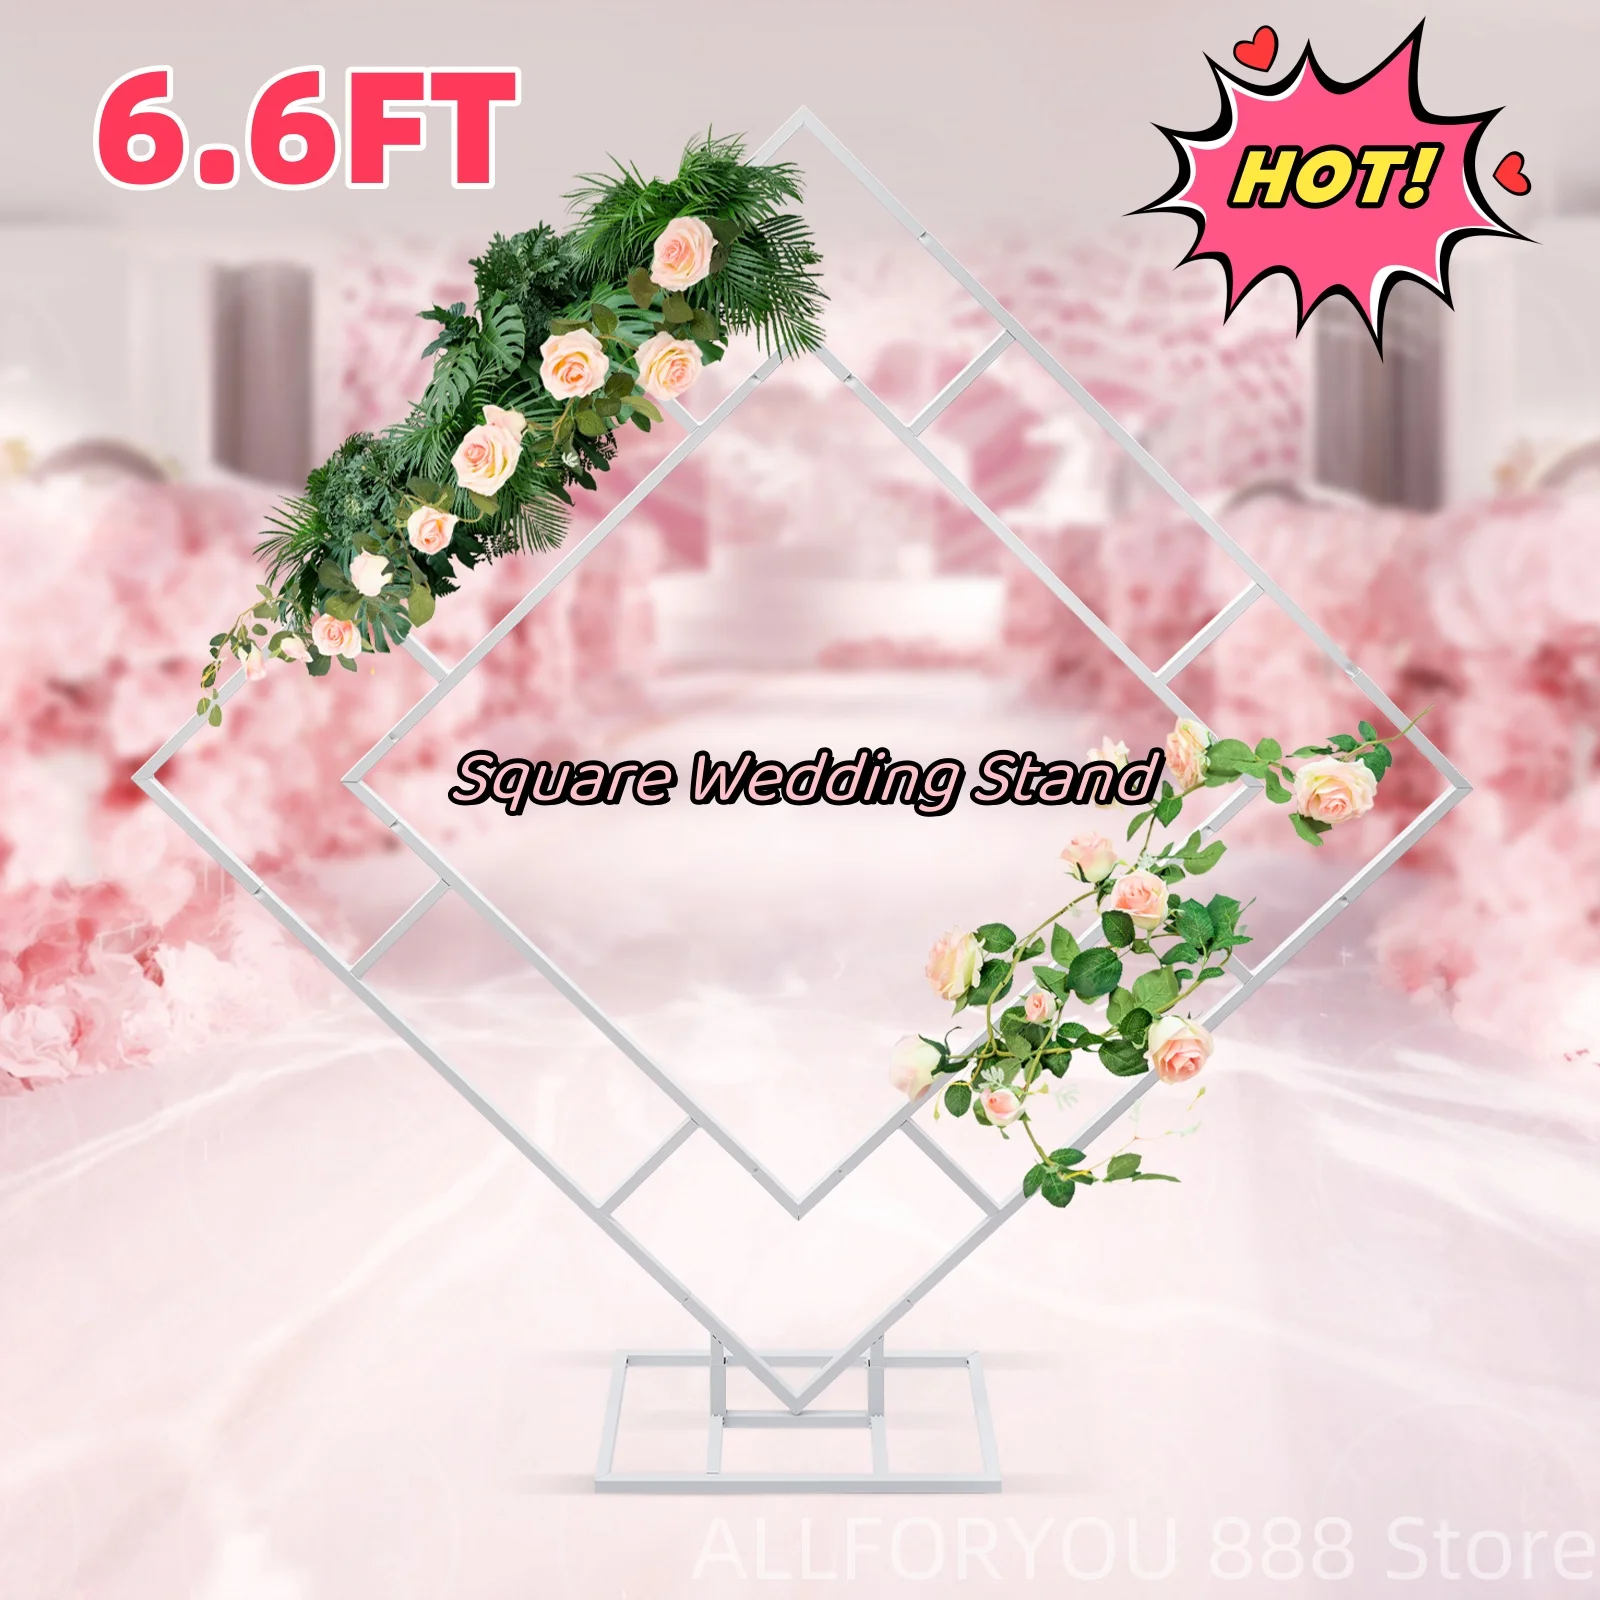 

6.6FT Frame Wedding Backdrop Stand Metal Wedding Balloon Arch Kit for Weddings, Birthday Parties, Engagements, Baby Showers